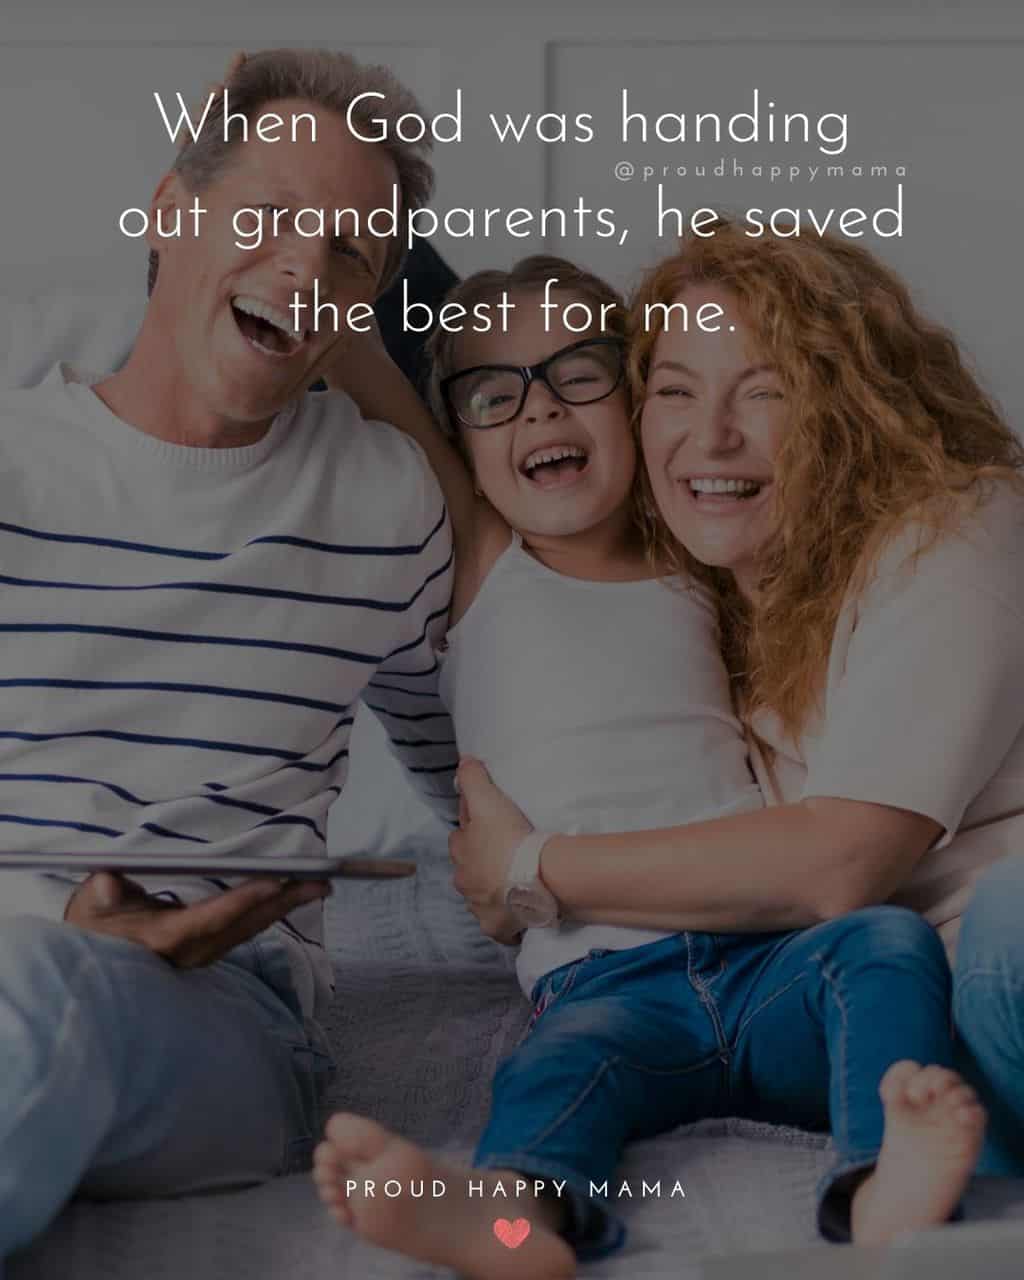 Grandparent Quotes – When God was handing out grandparents, he saved the best for me.’